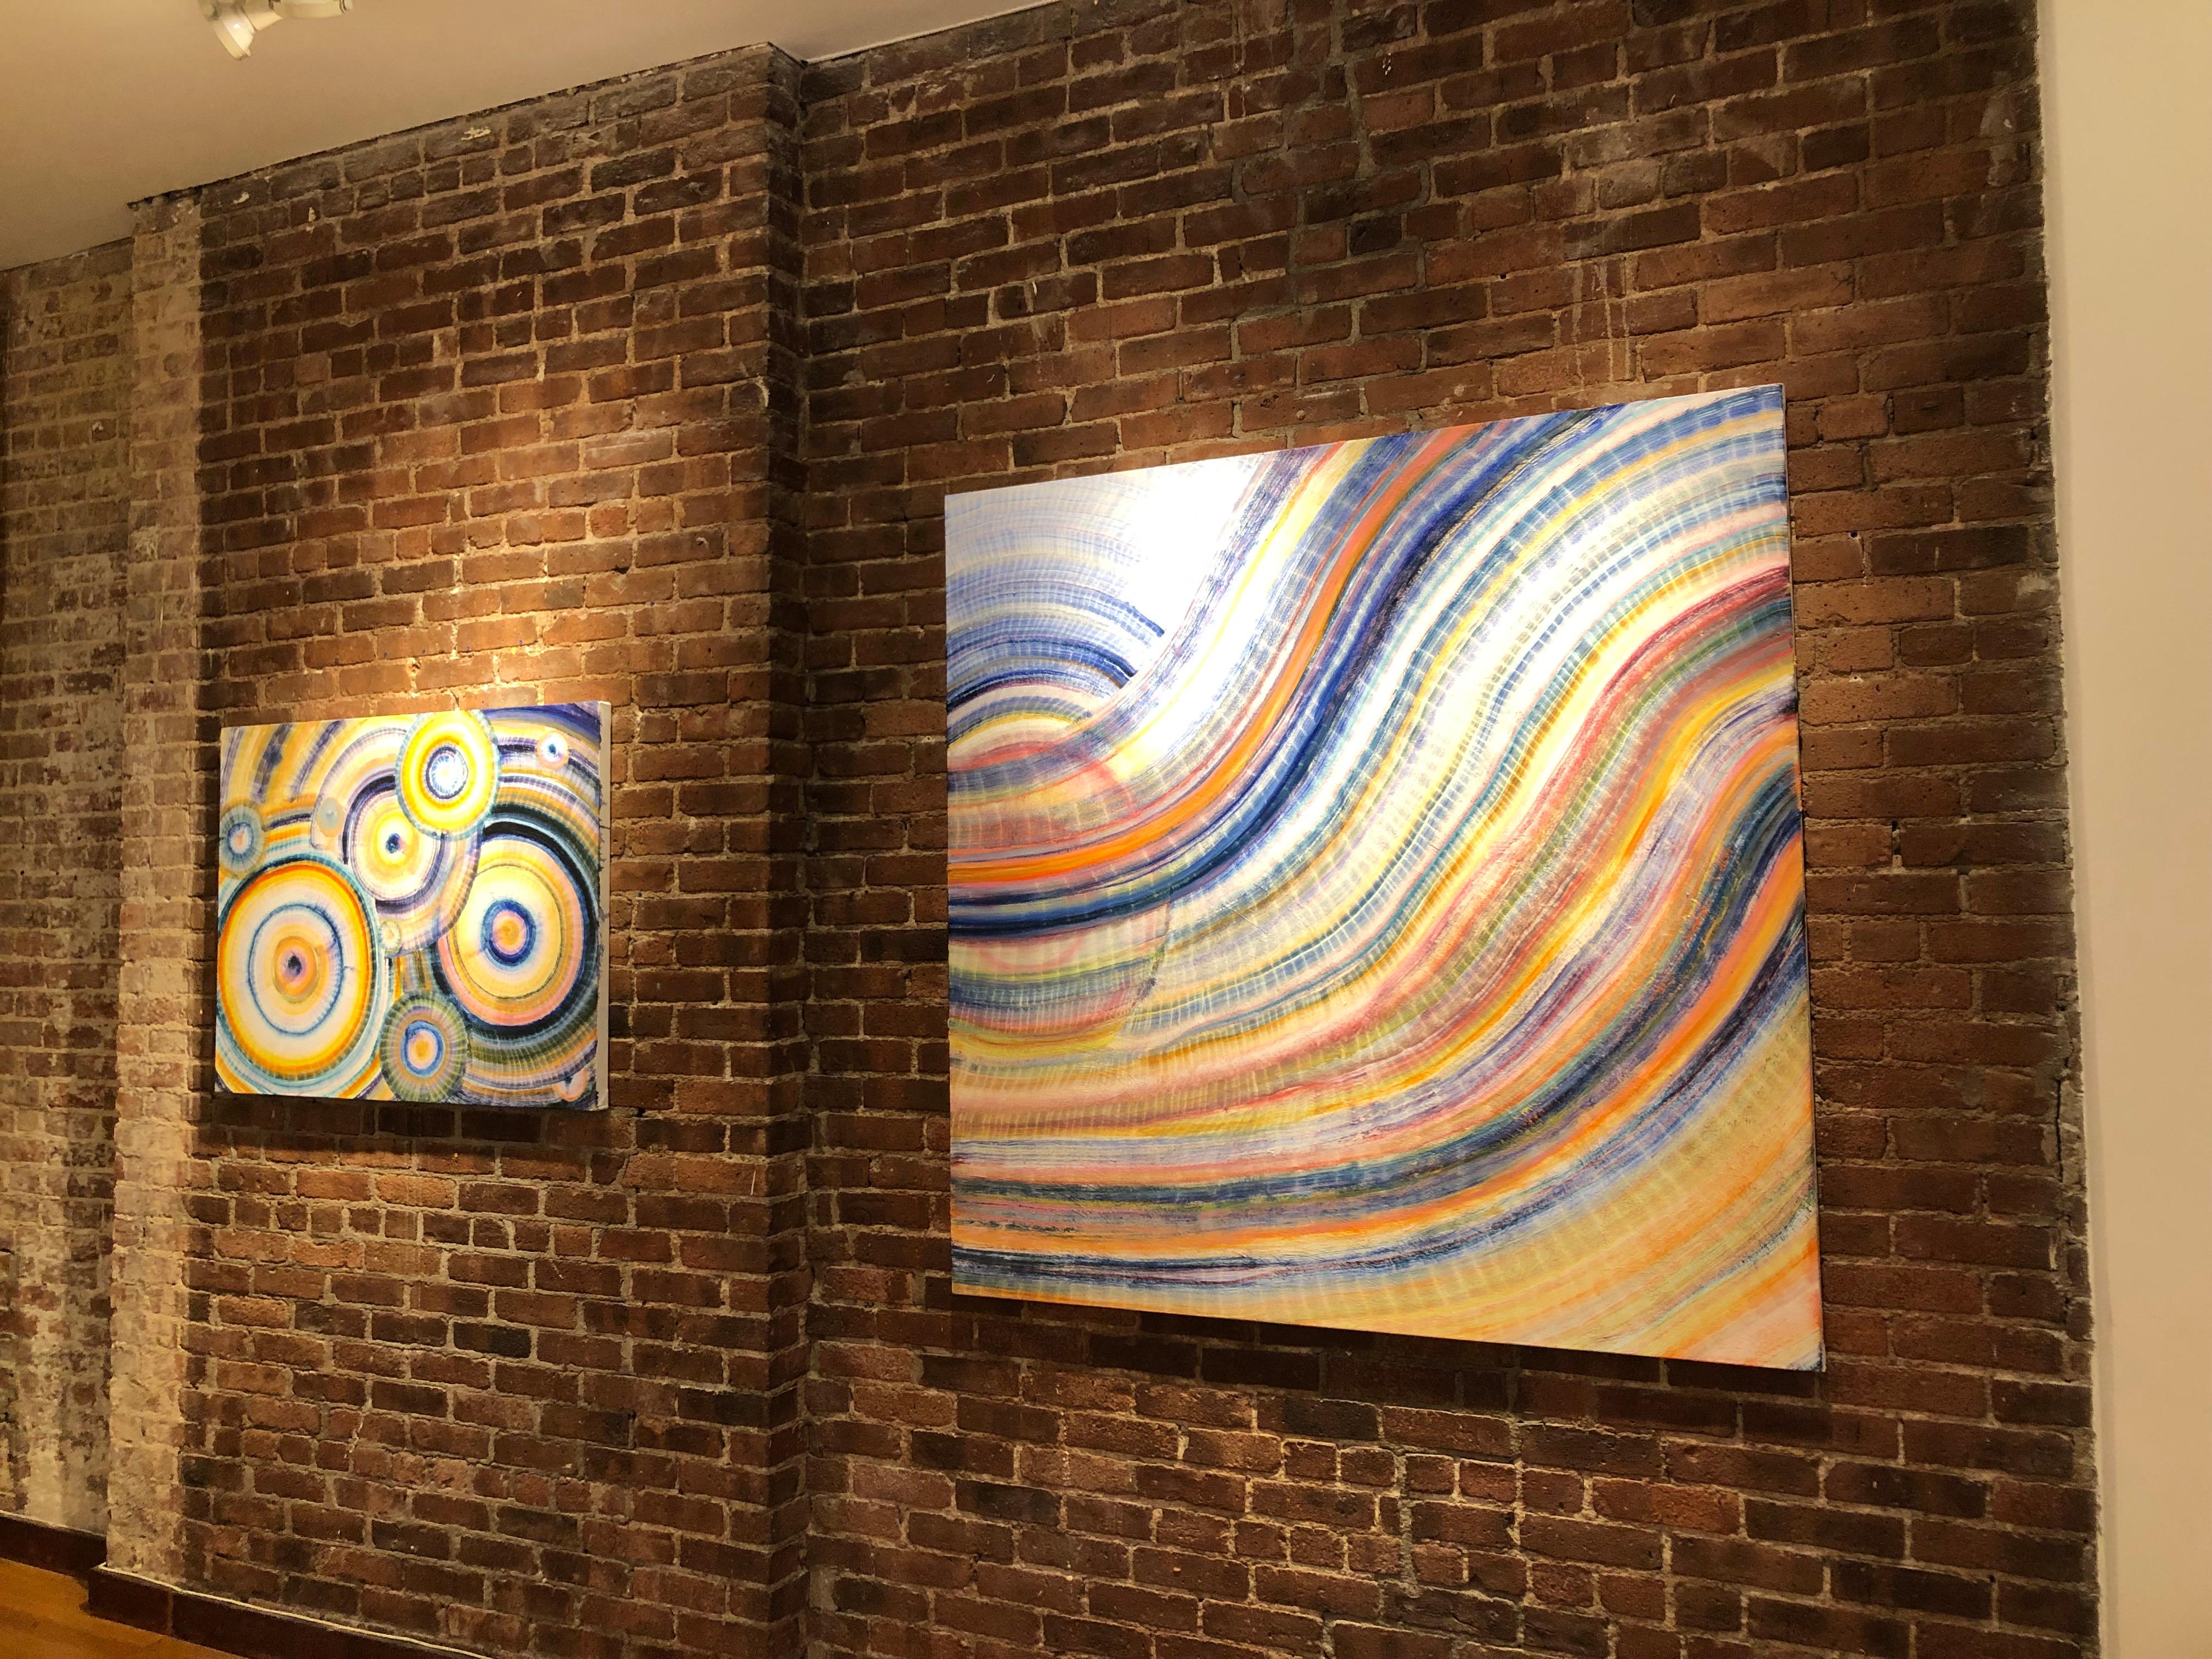 Danielle Riede’s abstract oil paintings are sublime in scale and in palette. These latest works expand on her interest in dance and movement expressed in luminous color. Fascinated by the ephemerality of movement, Danielle Riede physicalizes the